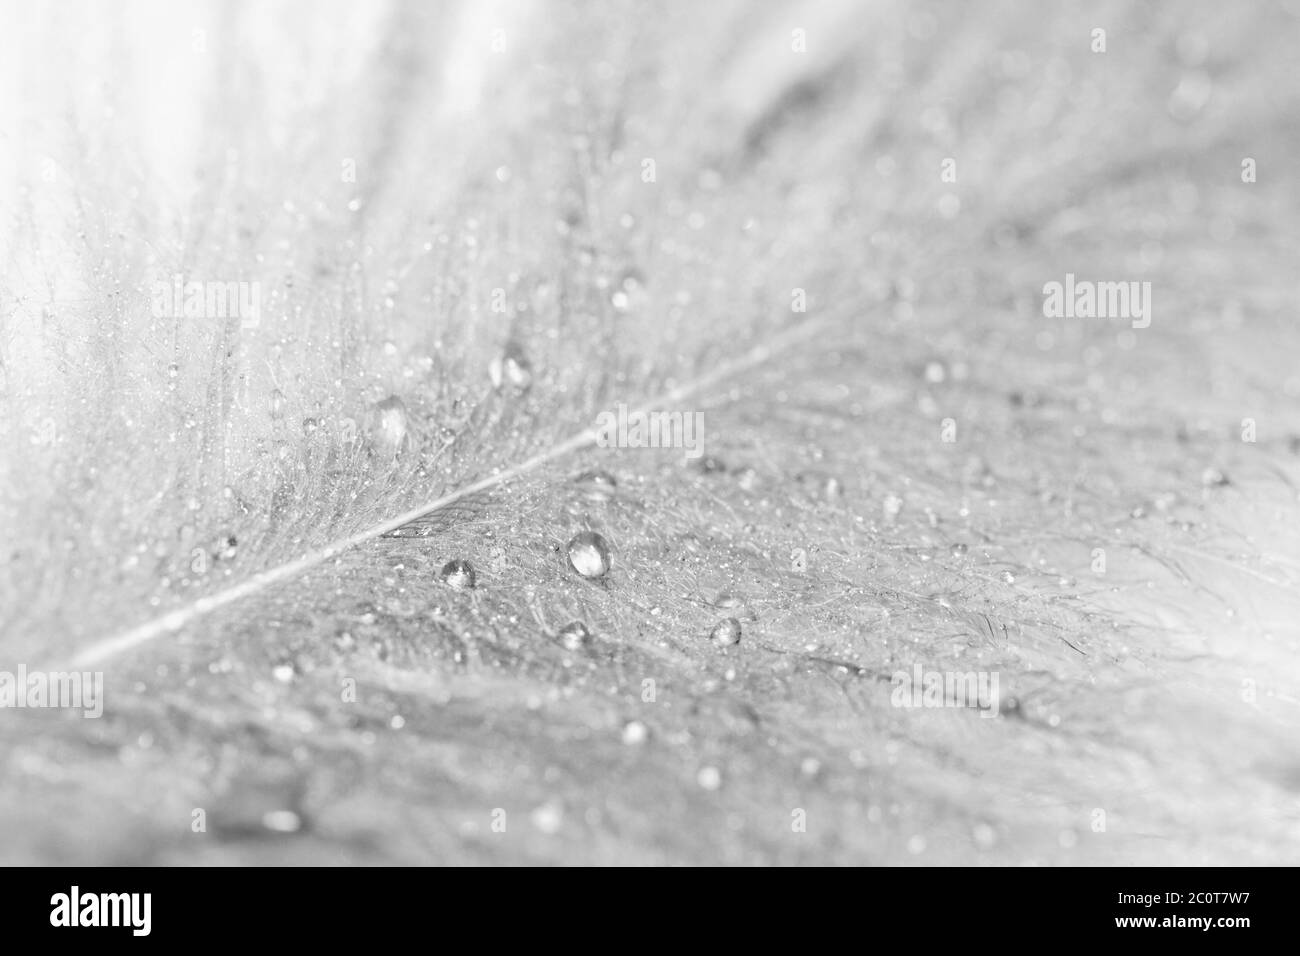 Photo of owl feathers with water droplets Stock Photo